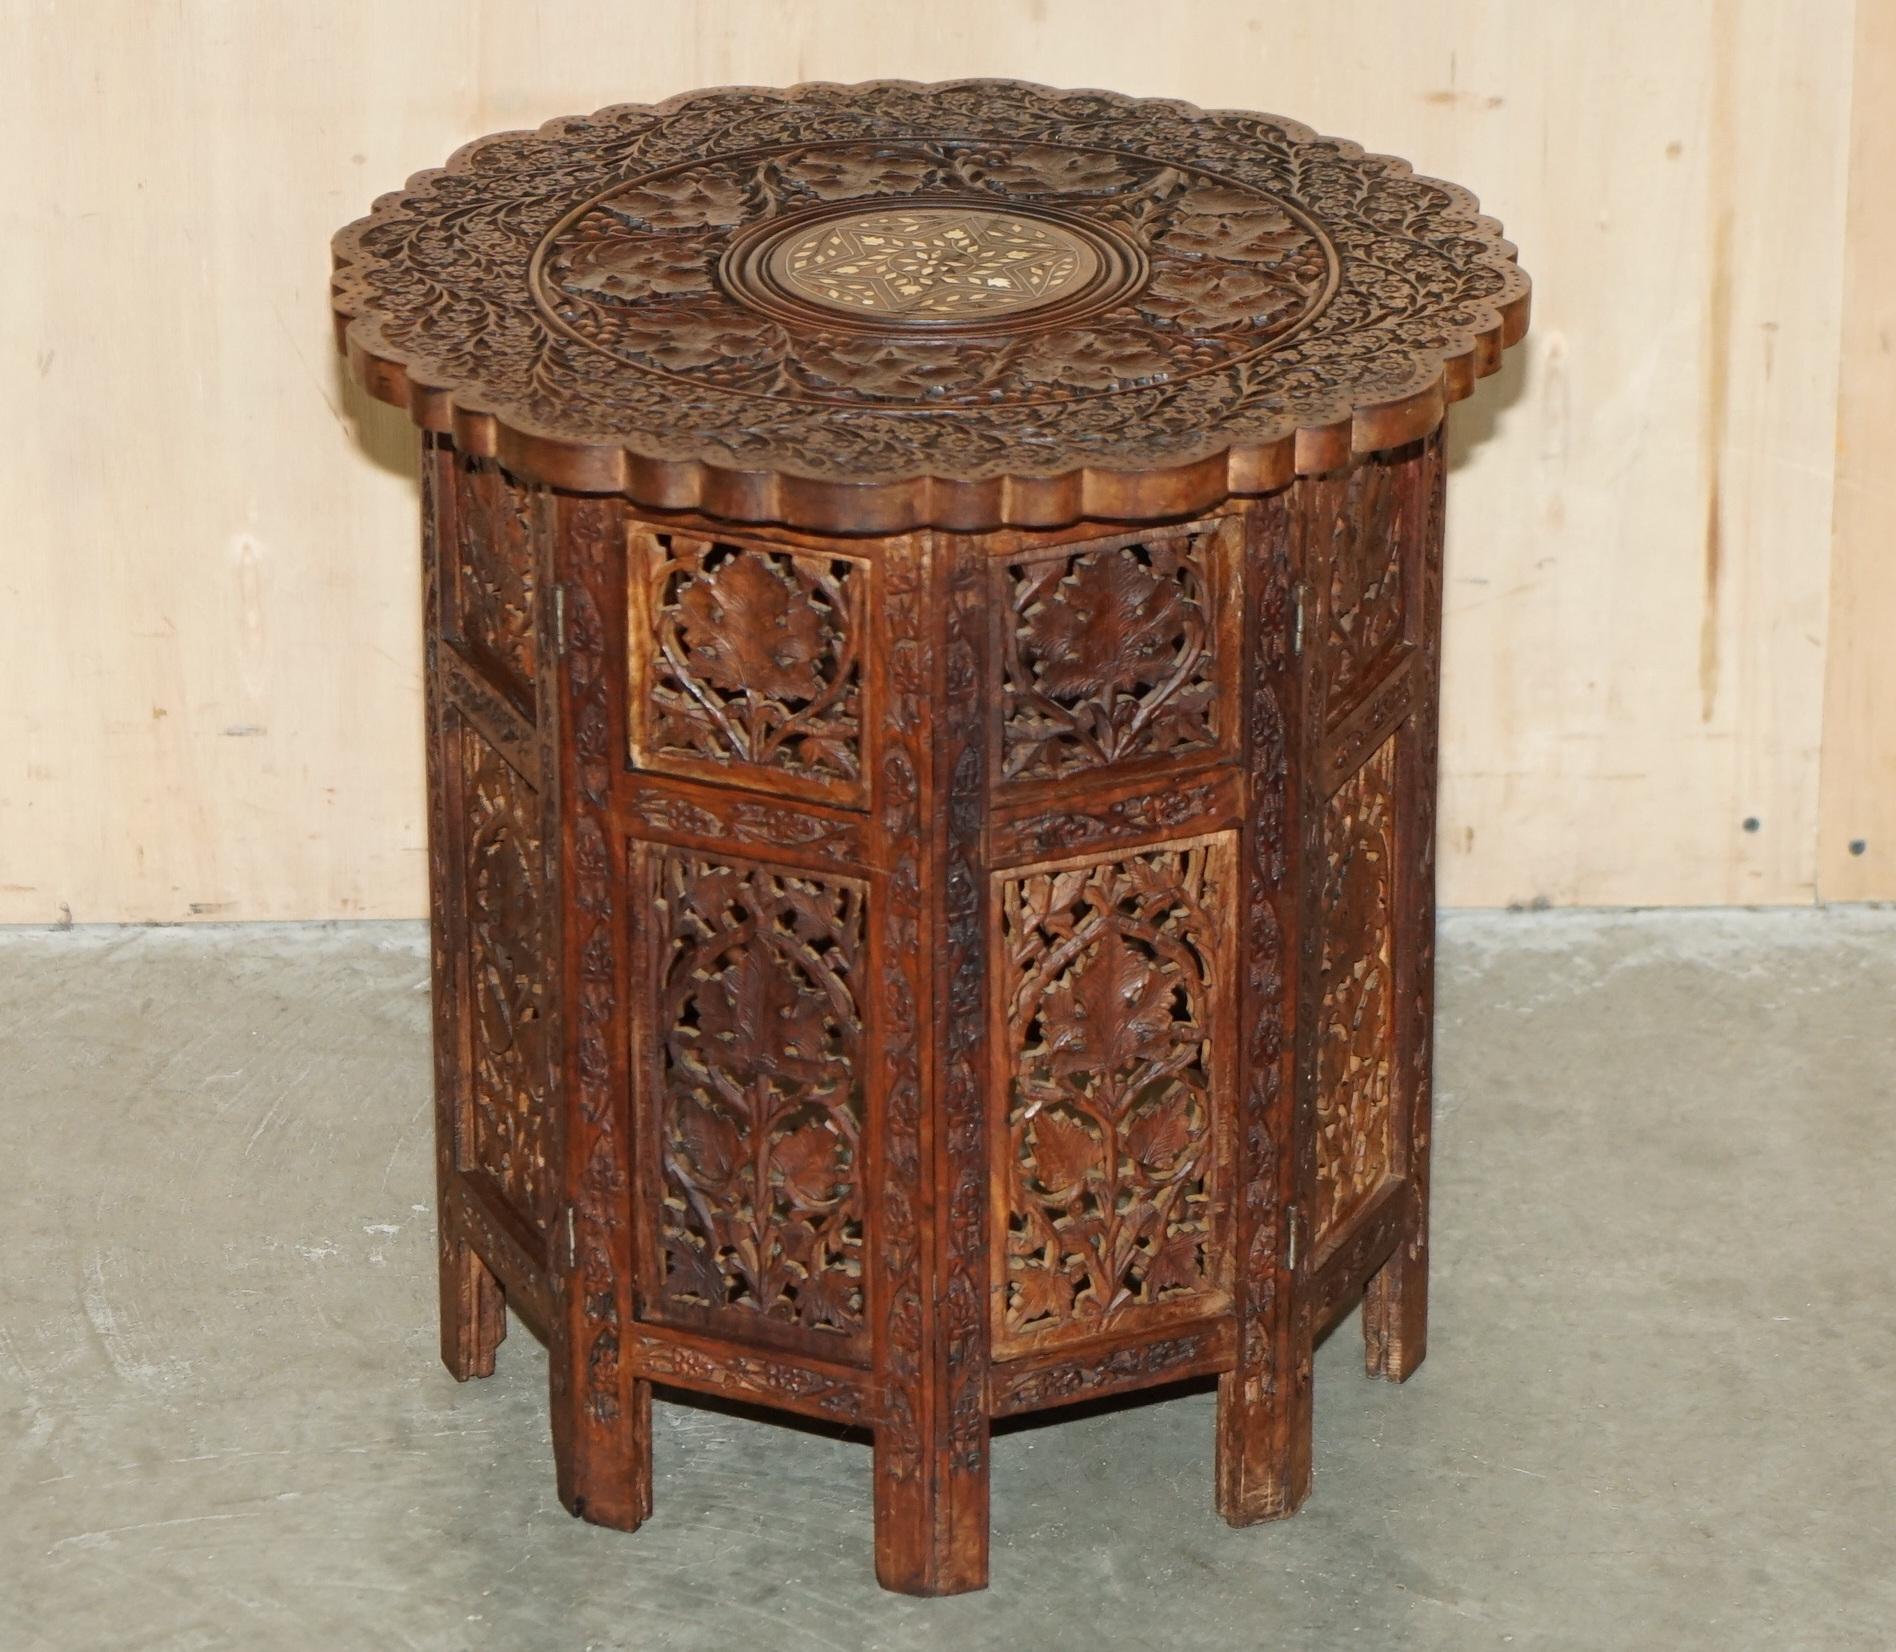 Royal House Antiques

Royal House Antiques is delighted to offer for sale this lovely and rare Syrian hand carved table retailed through Liberty's London circa 1880

Please note the delivery fee listed is just a guide, it covers within the M25 only